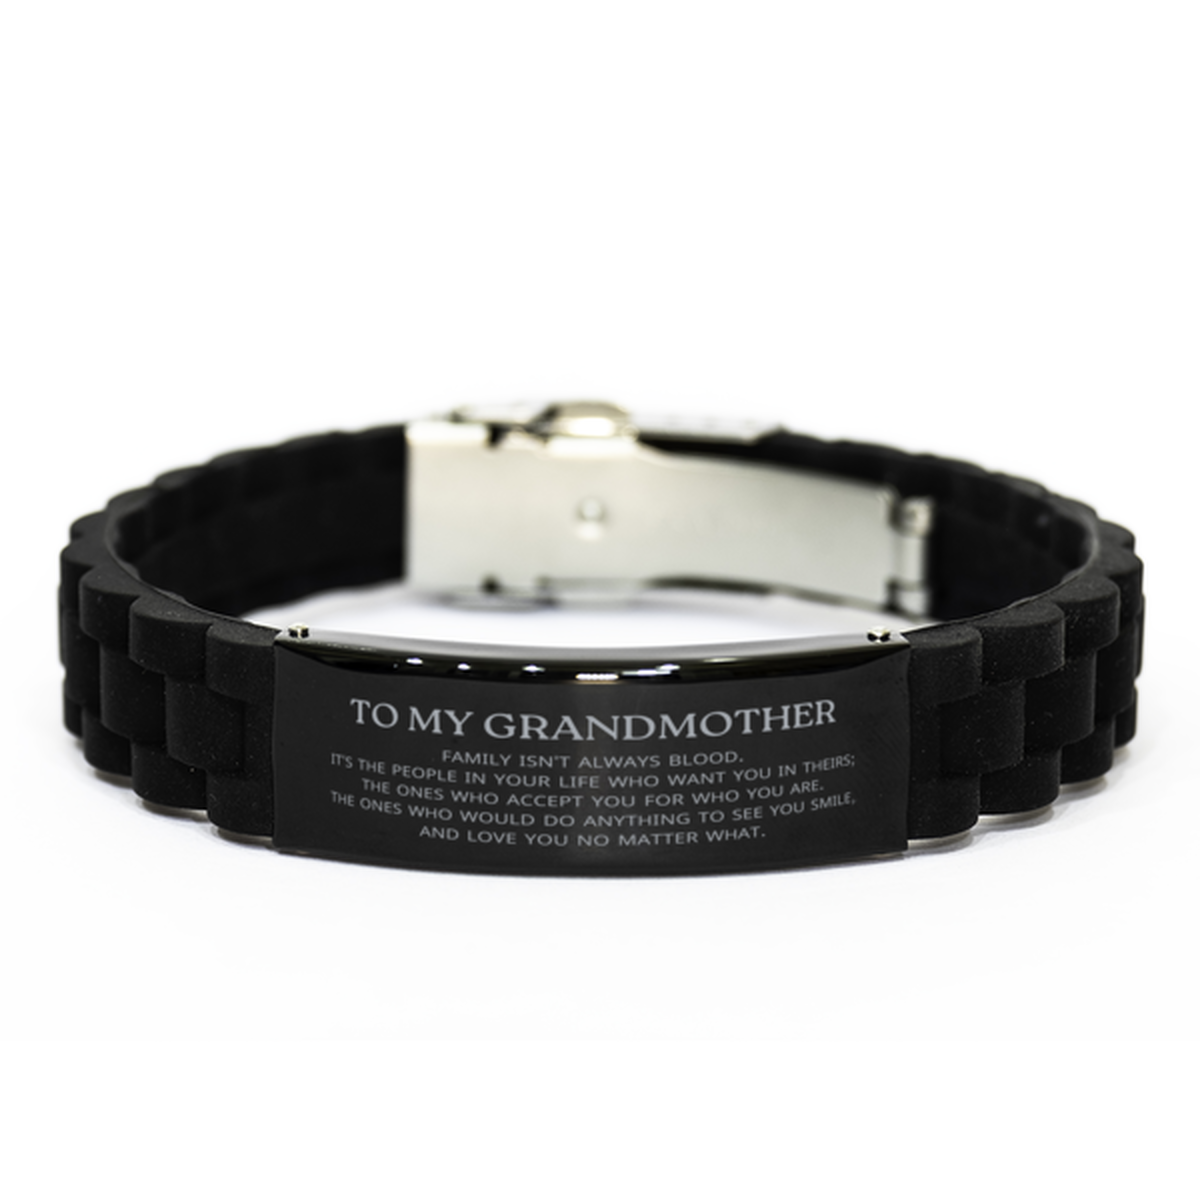 To My Grandmother Gifts, Family isn't always blood, Grandmother Black Glidelock Clasp Bracelet, Birthday Christmas Unique Present For Grandmother